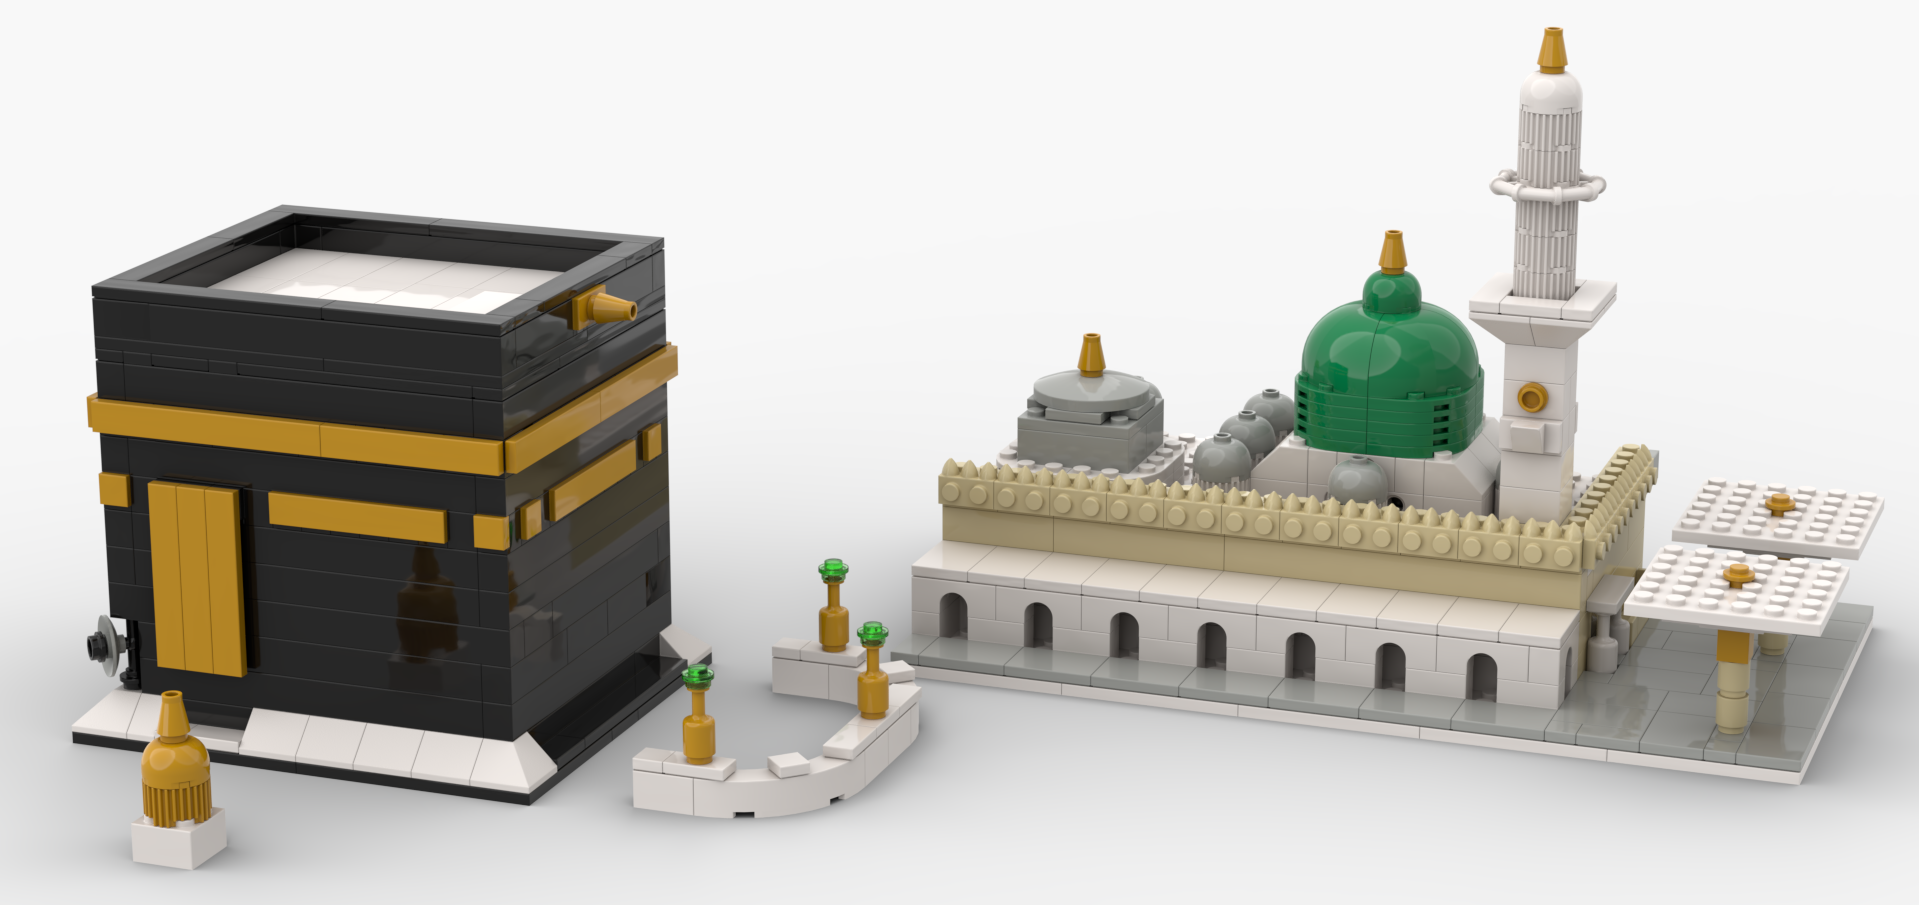 Lego style Islamic building block sets of the Kaaba and Masjid Nabawi